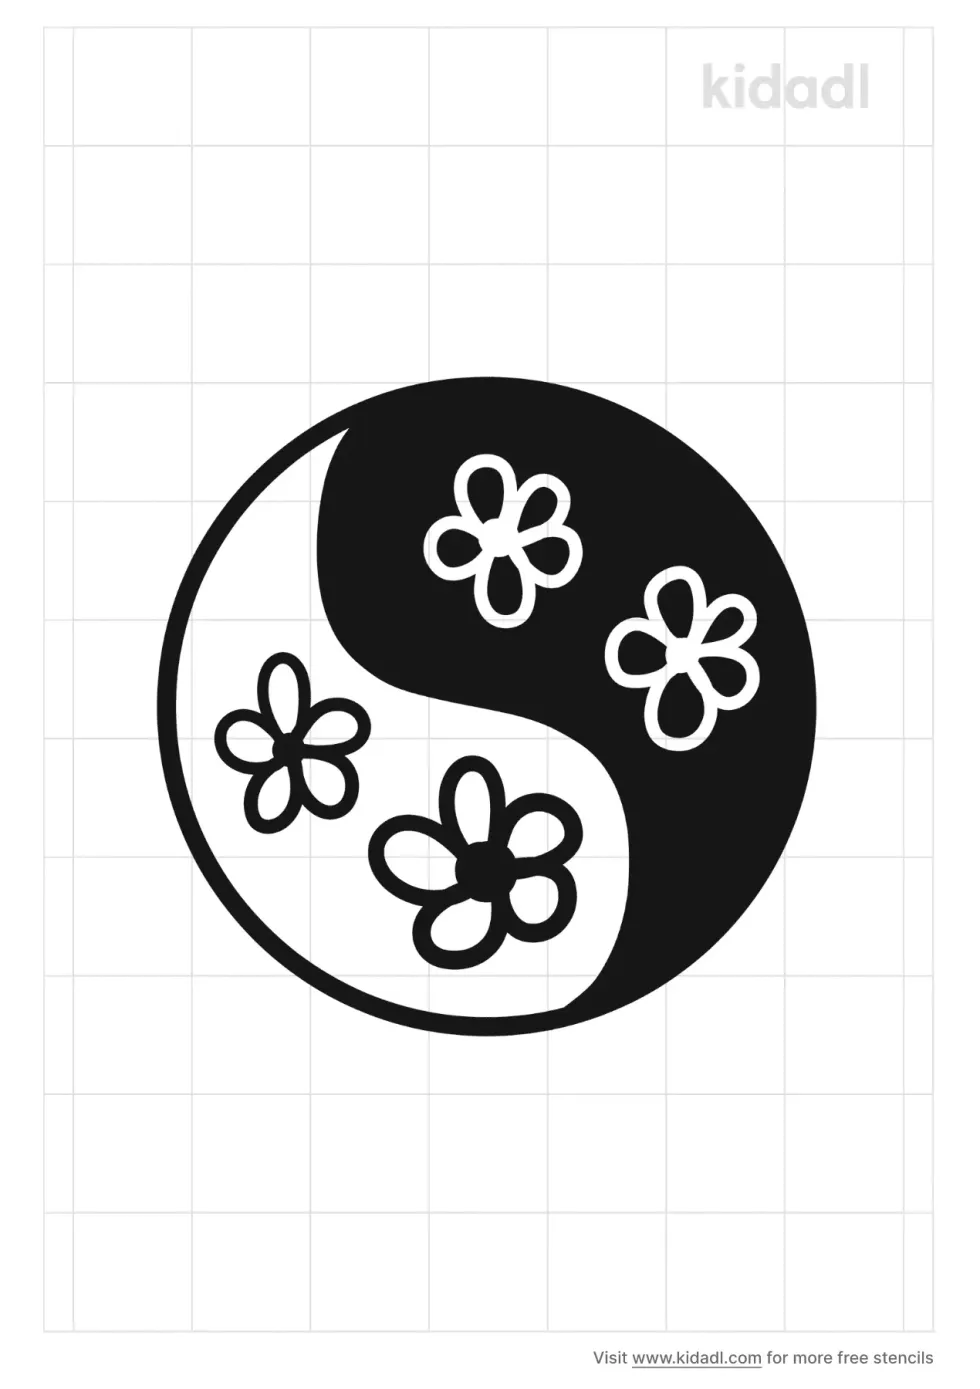 Flowers Of Ying-Yang